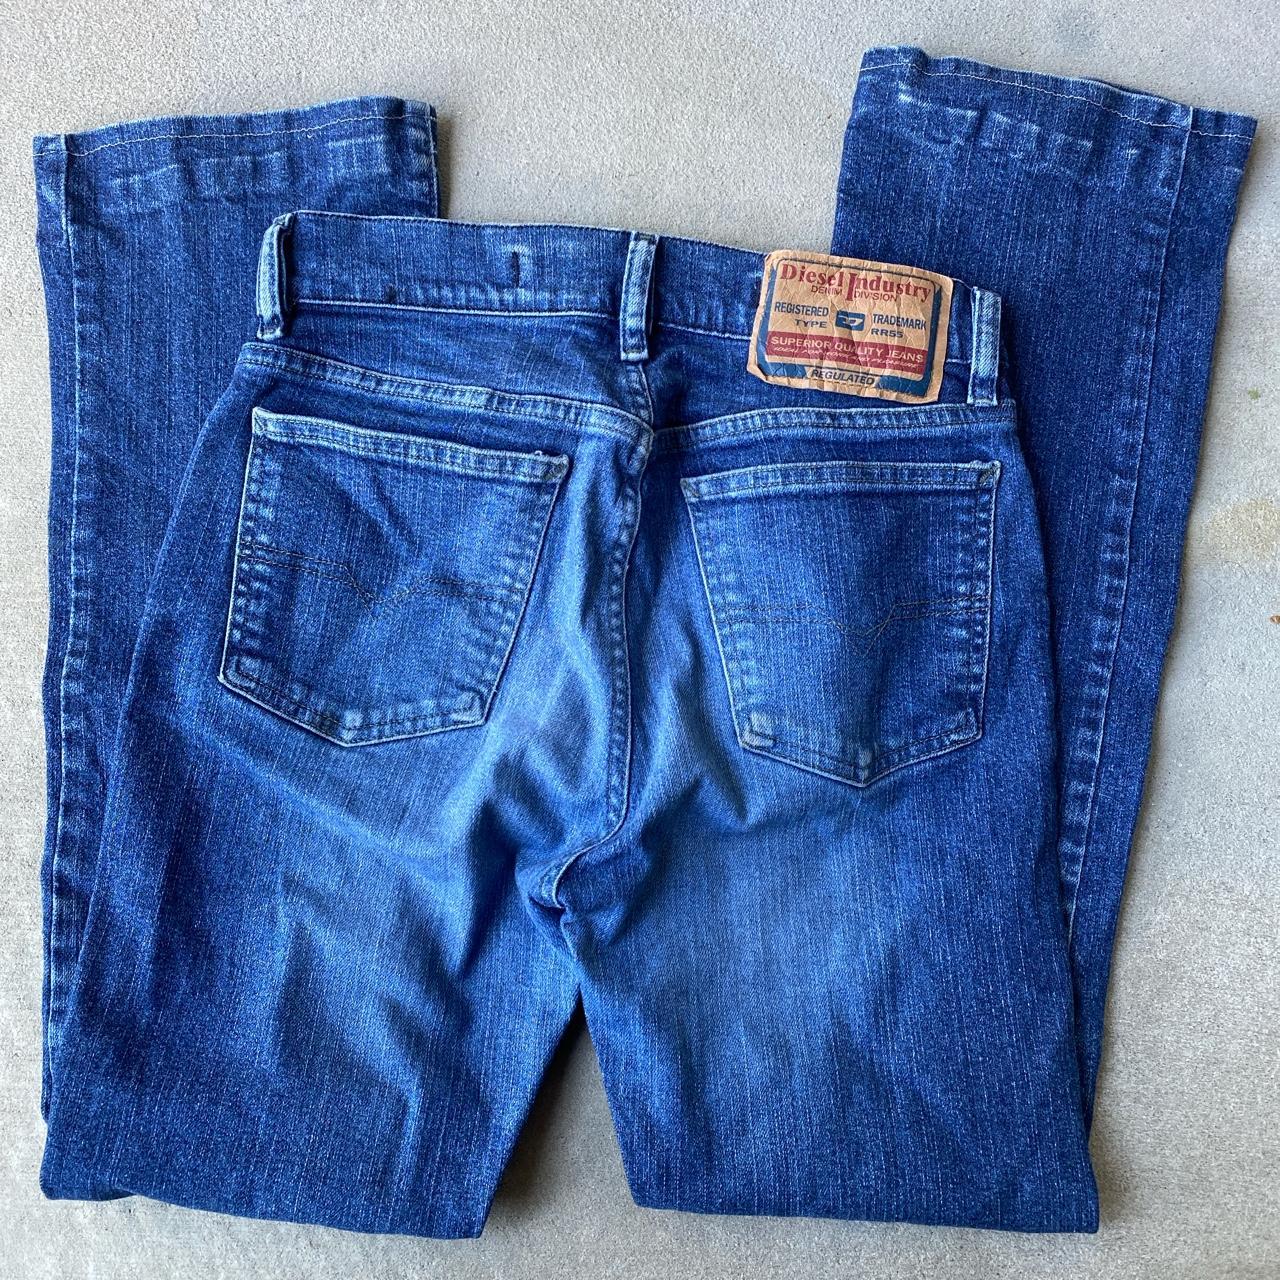 Diesel Red Tag Men's Navy and Blue Jeans